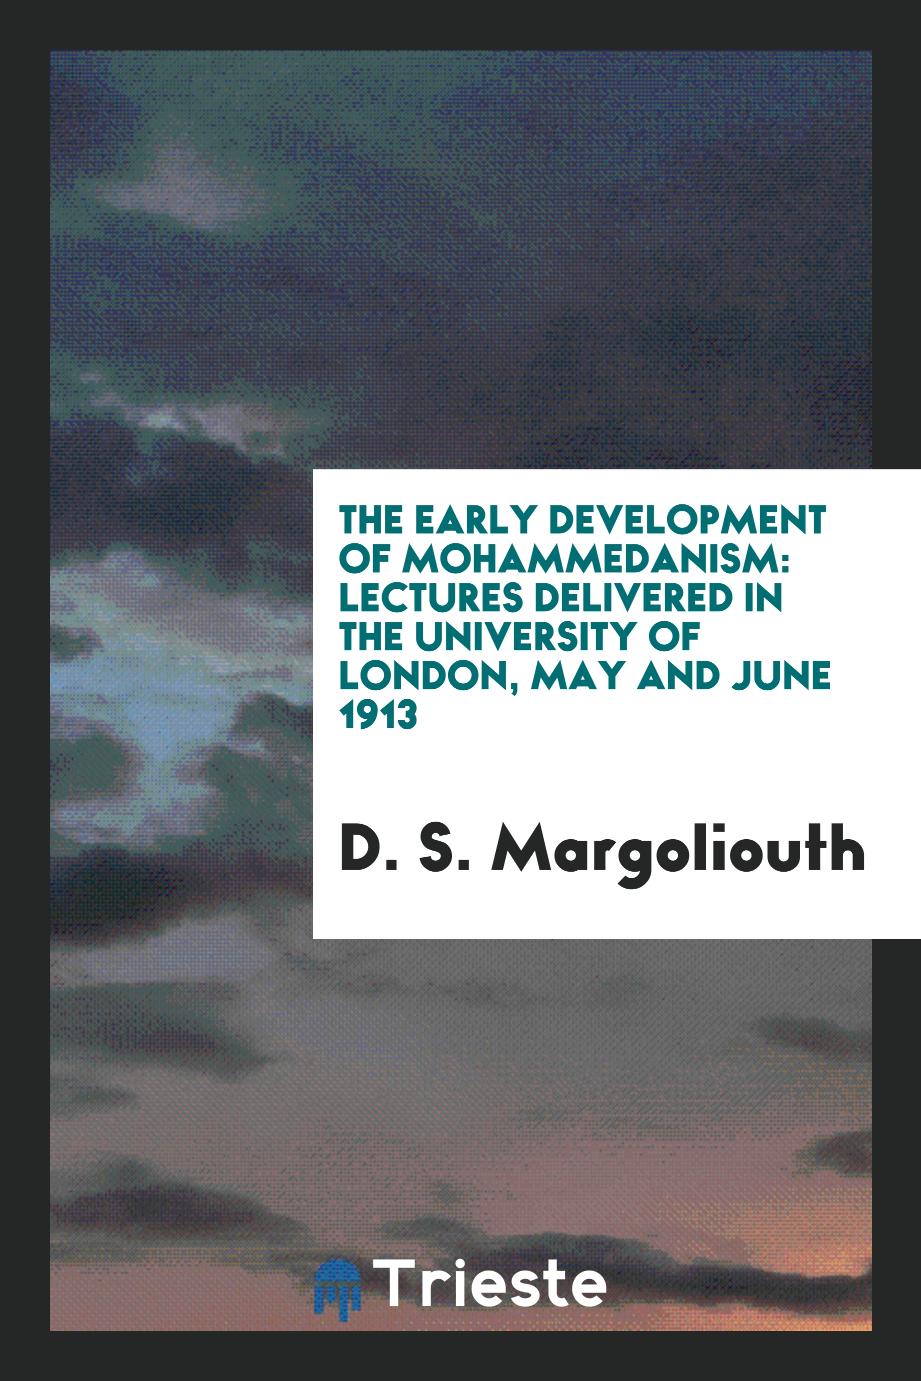 The early development of Mohammedanism: lectures delivered in the University of London, May and June 1913